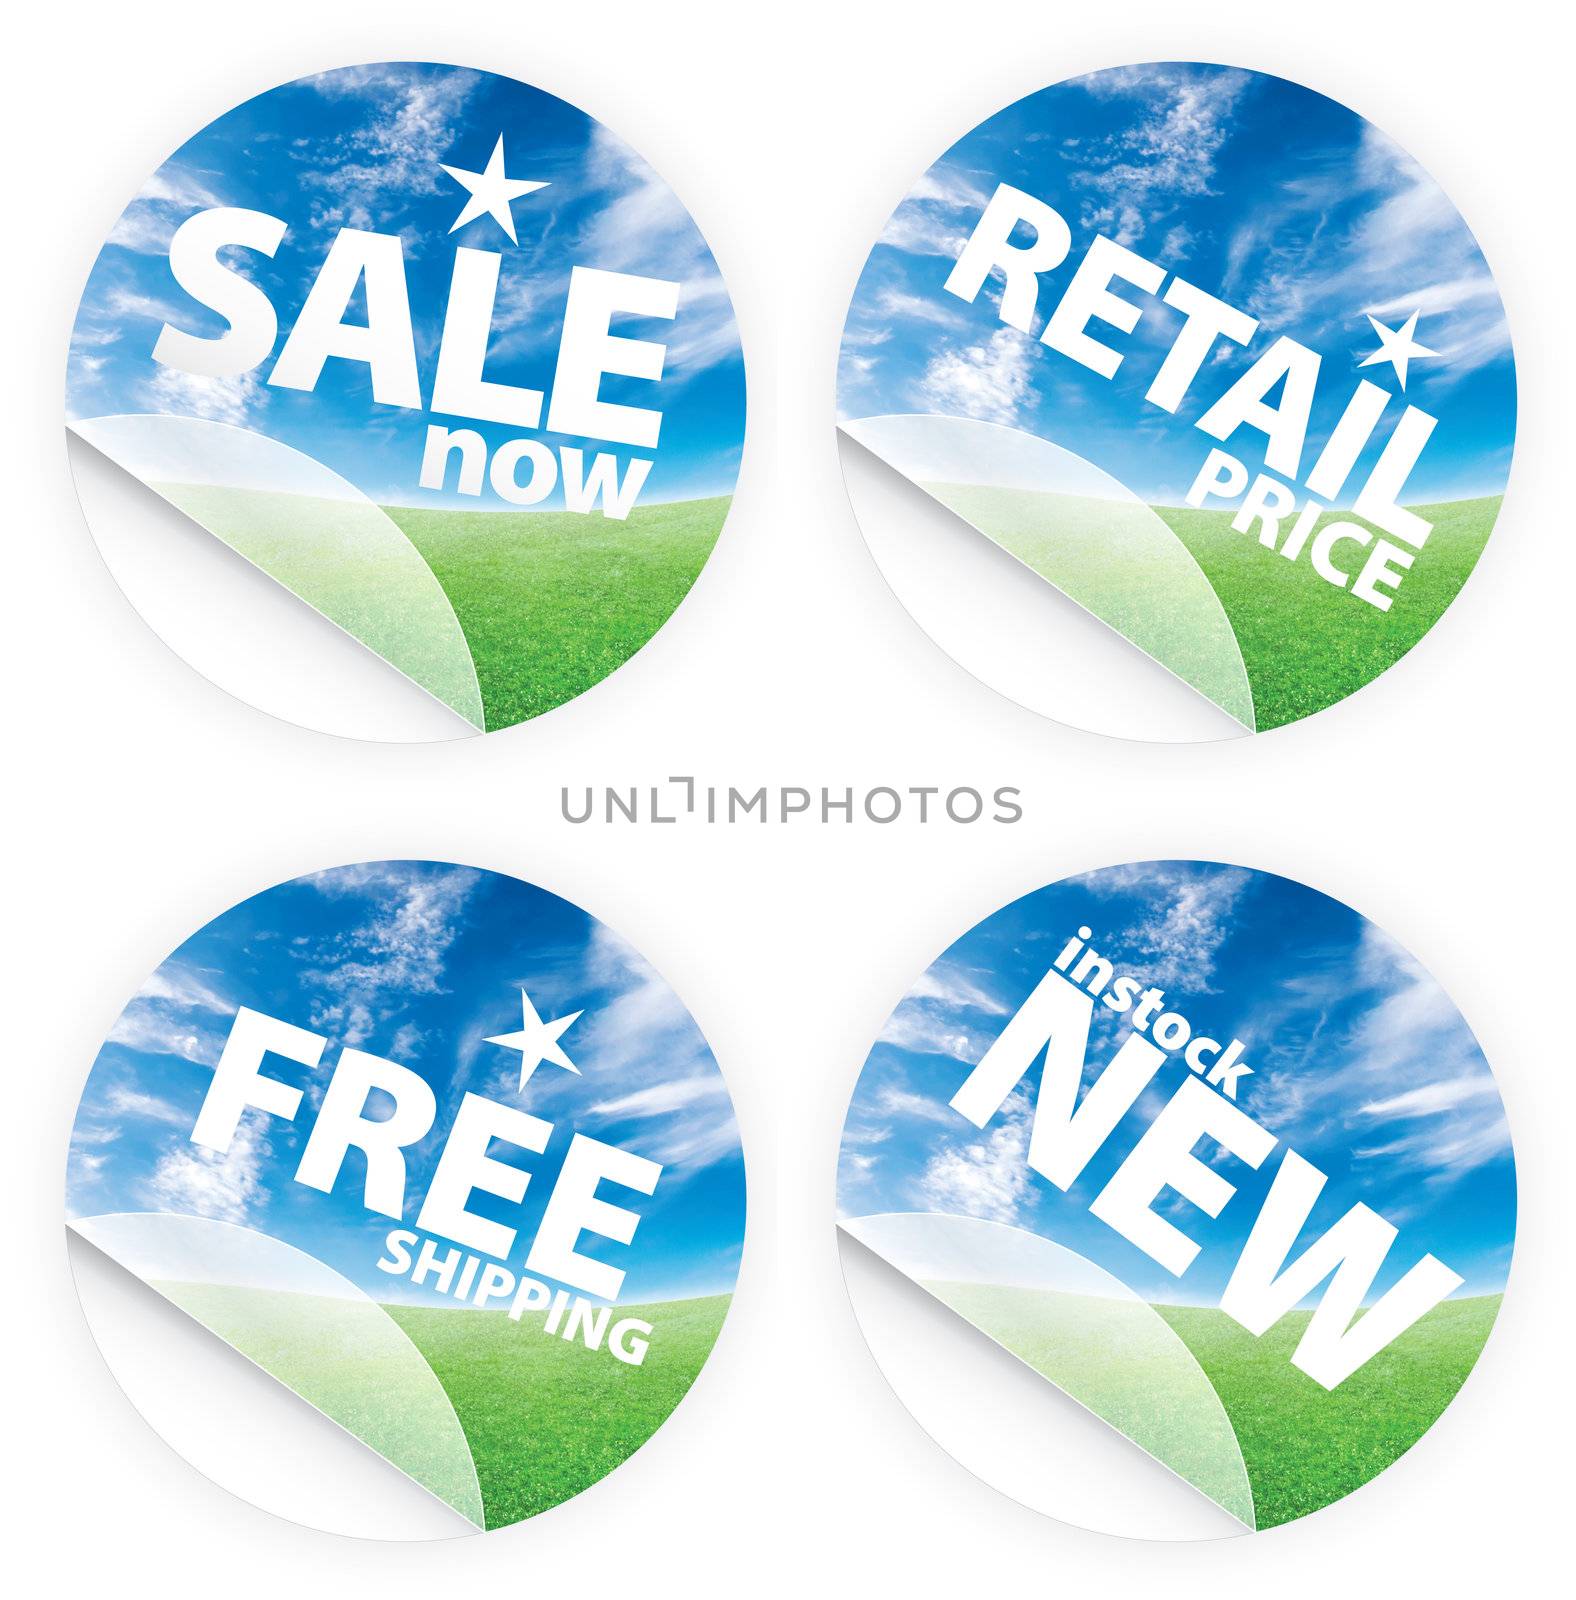 Illustrations of beautiful stickers with green grass and blue sky. Themes include sales, free shipping, retail price and new item in stock. Set 1.